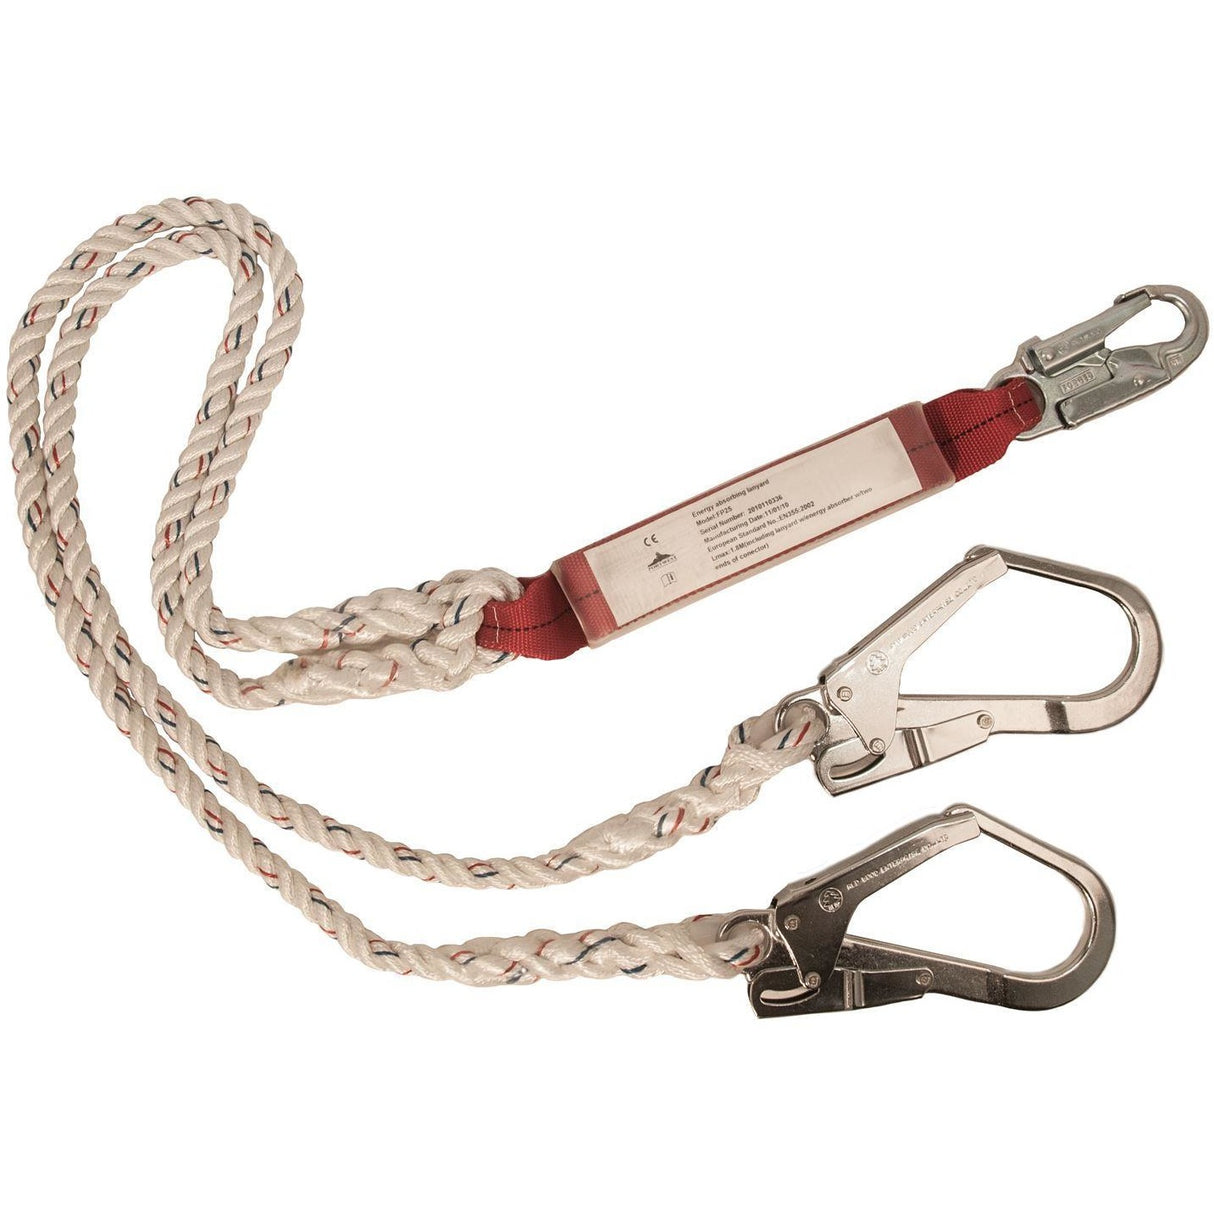 Portwest Double Lanyard With Shock Absorber